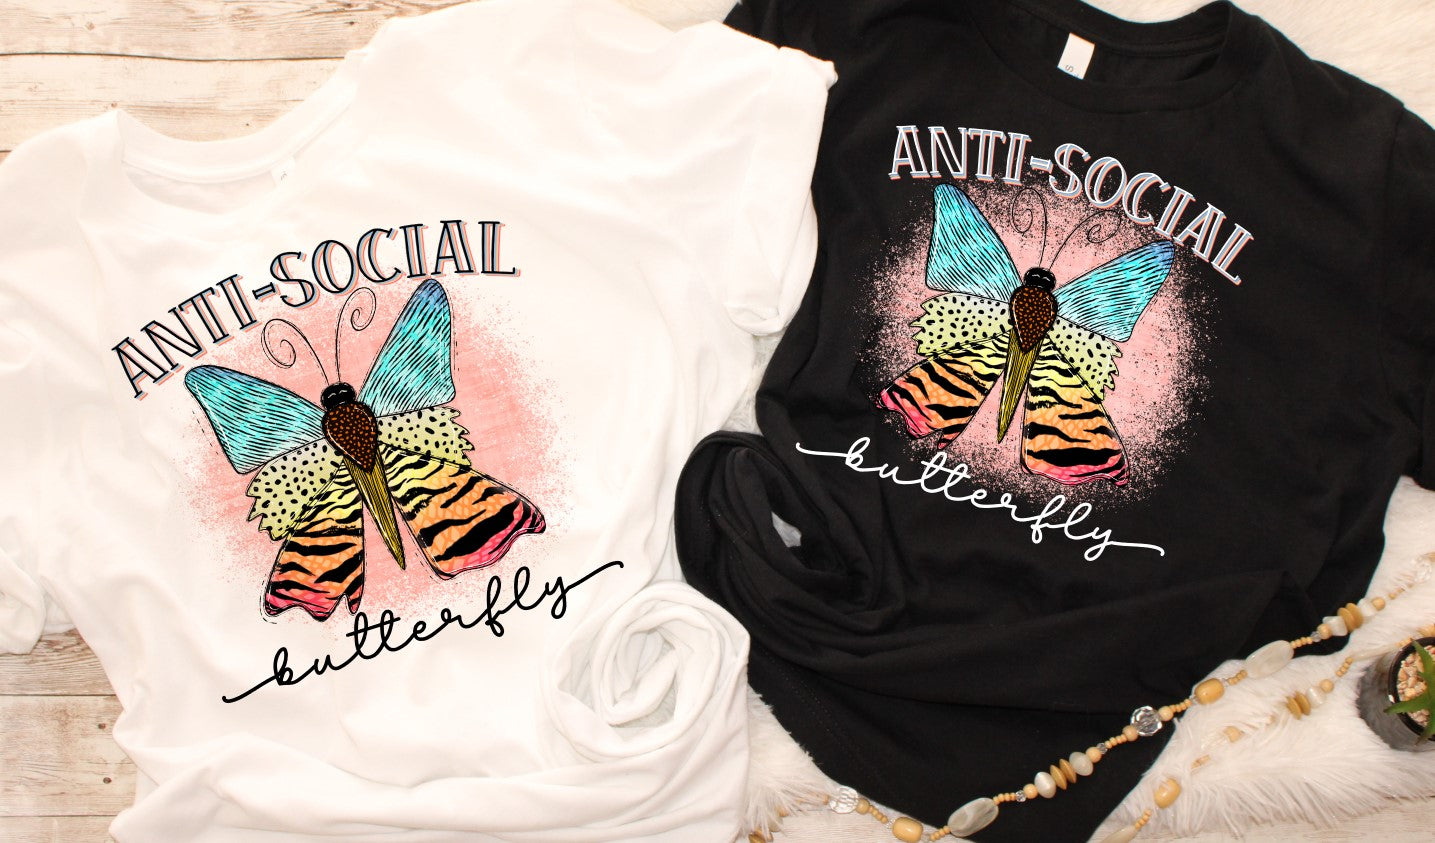 Anti-Social Butterfly [black and white versions]